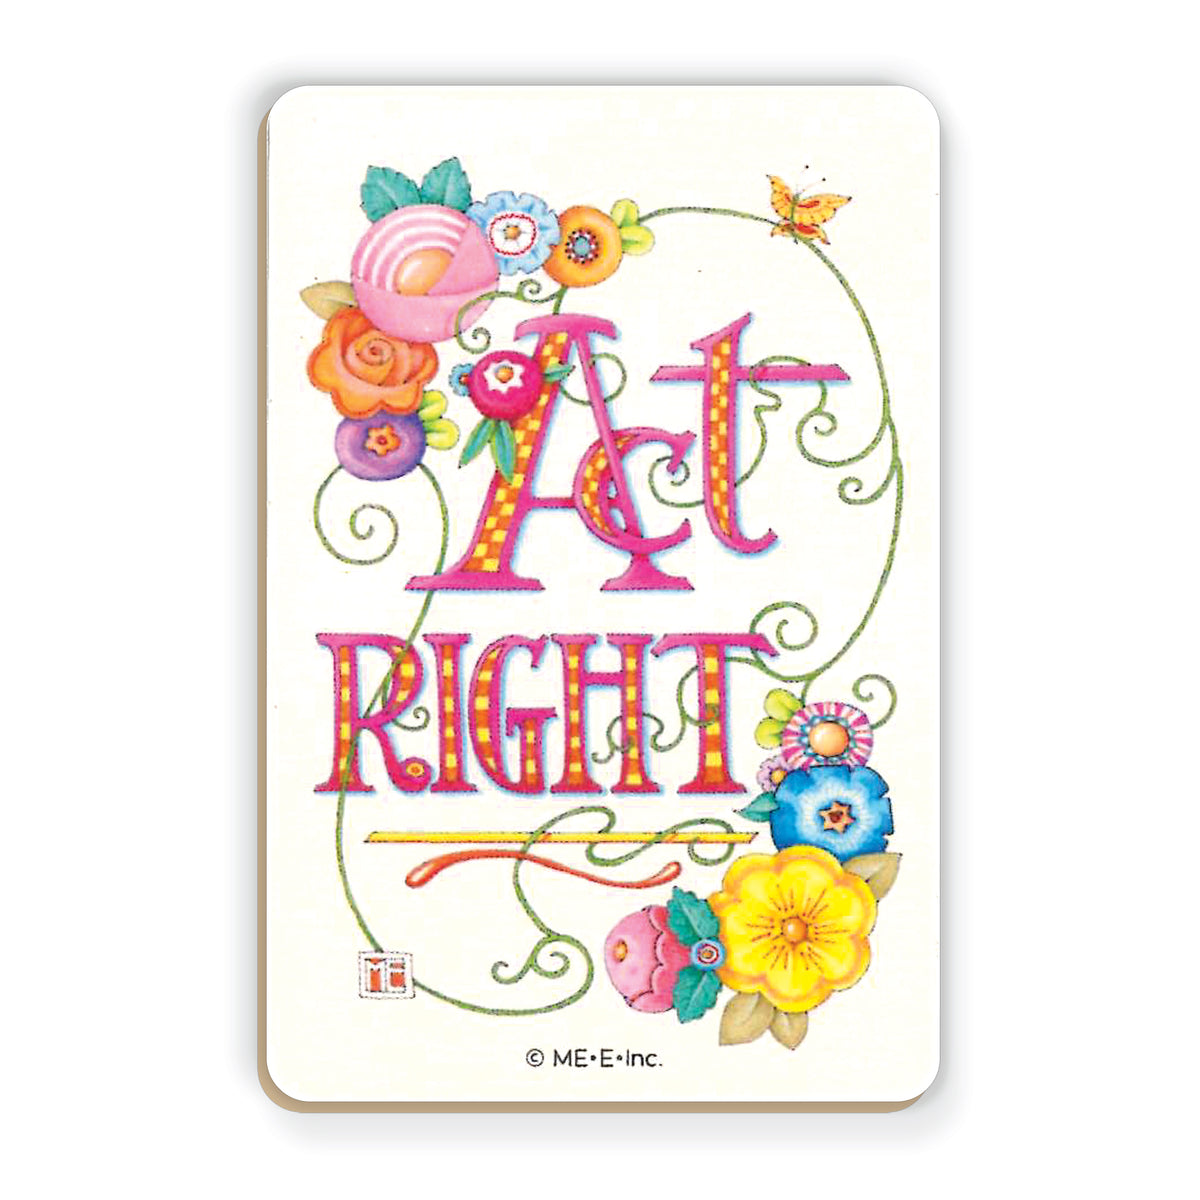 Act Right Wooden Magnet